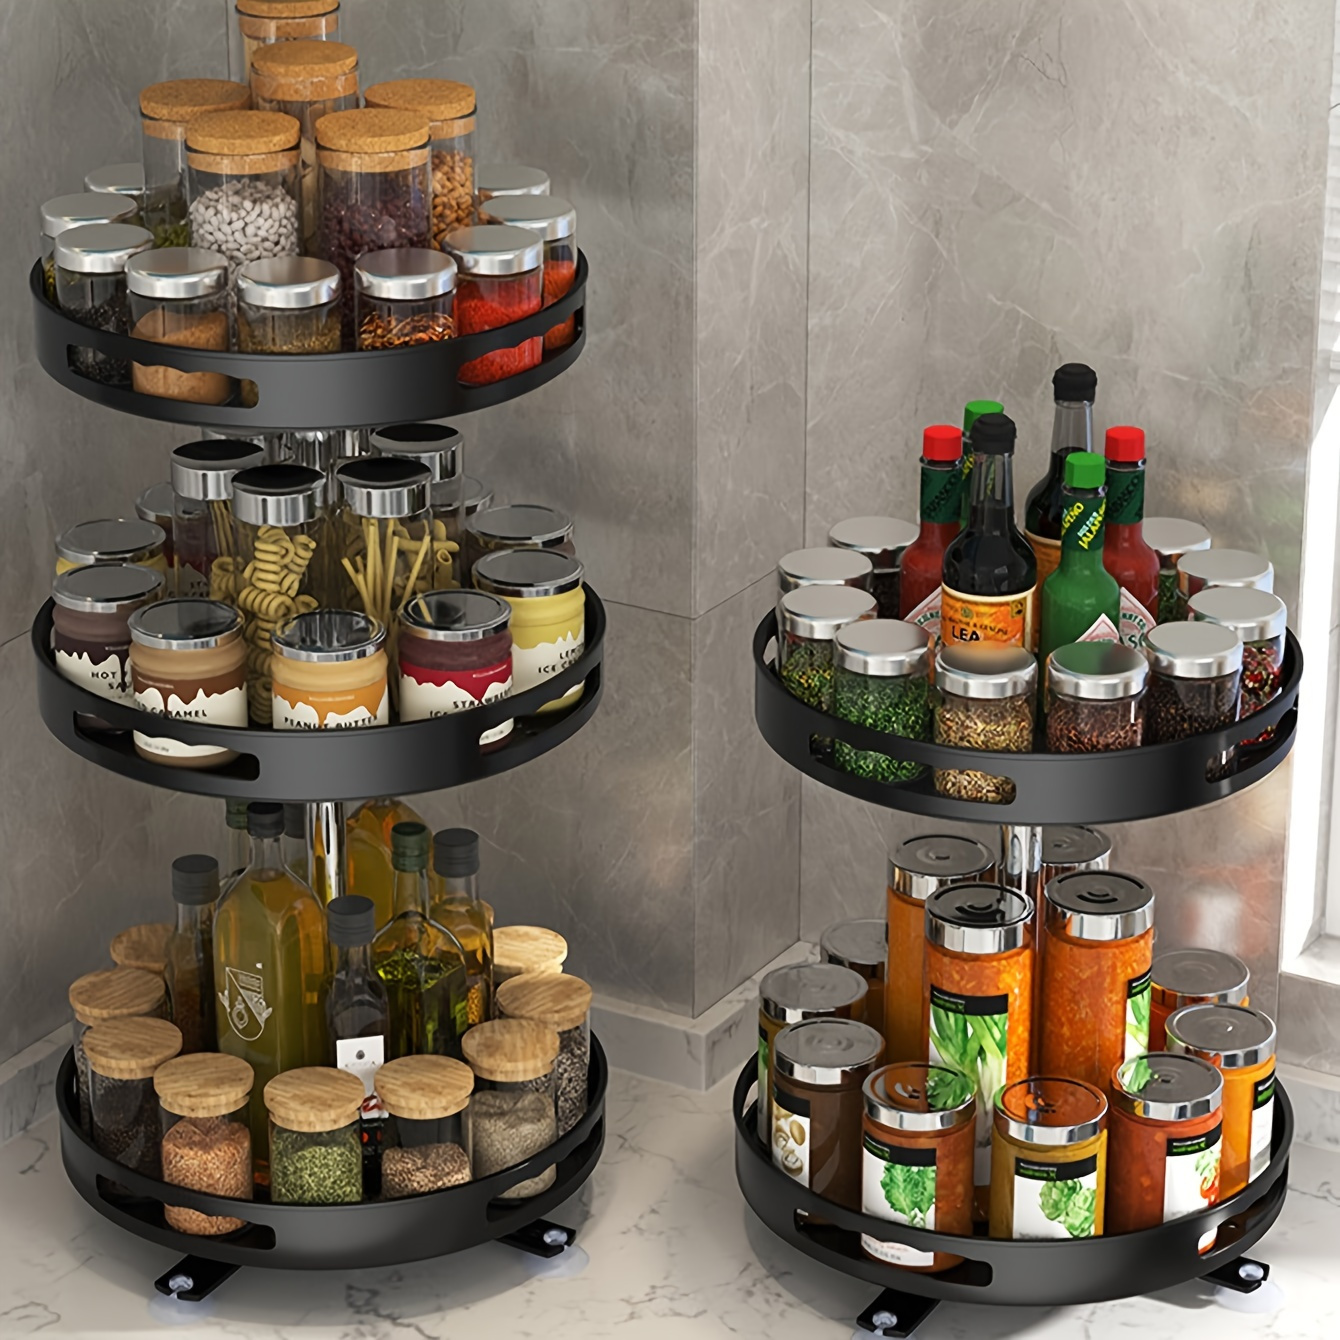 

3-tier Rotating Kitchen Organizer - Metal Countertop Storage Rack For Spices, Makeup & More - Space-saving Design For Home, Dorms